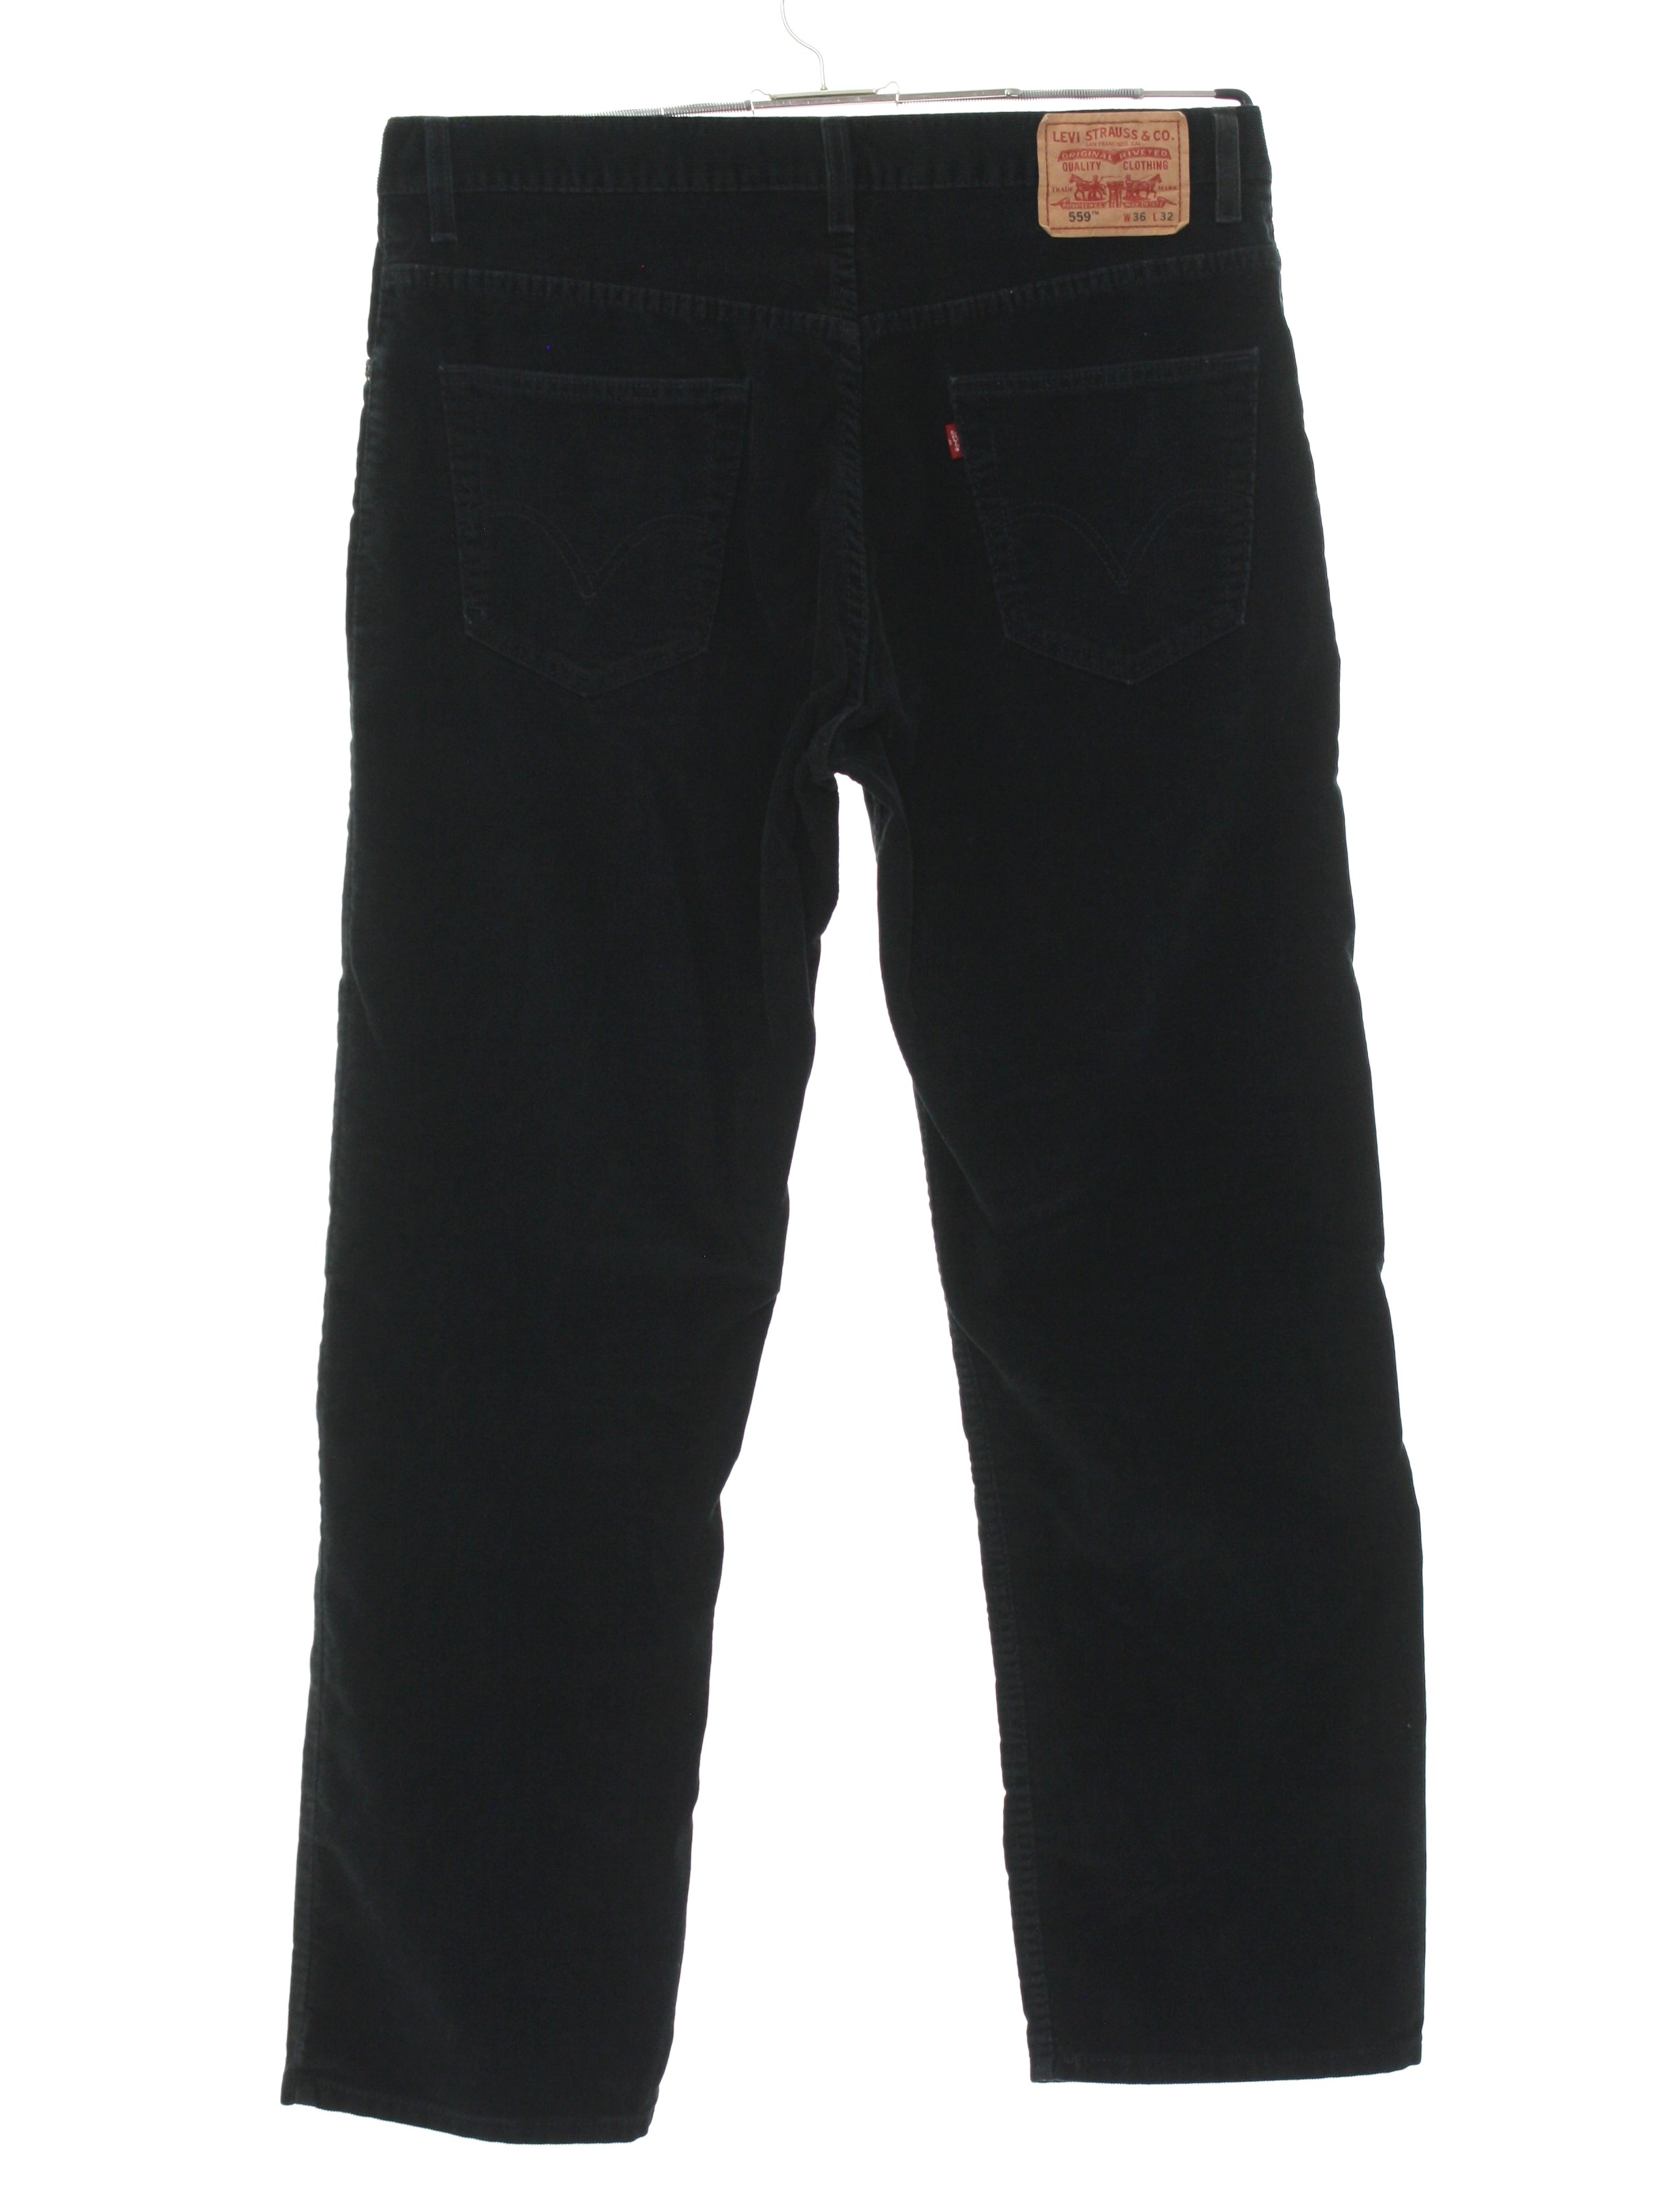 Pants: 90s -Levis 559- Mens black solid colored cotton polyester corduroy  flat front, straight leg corduroy pants with cuffless hem, classic five  pocket styling, two rear patch pockets, button and zippered front